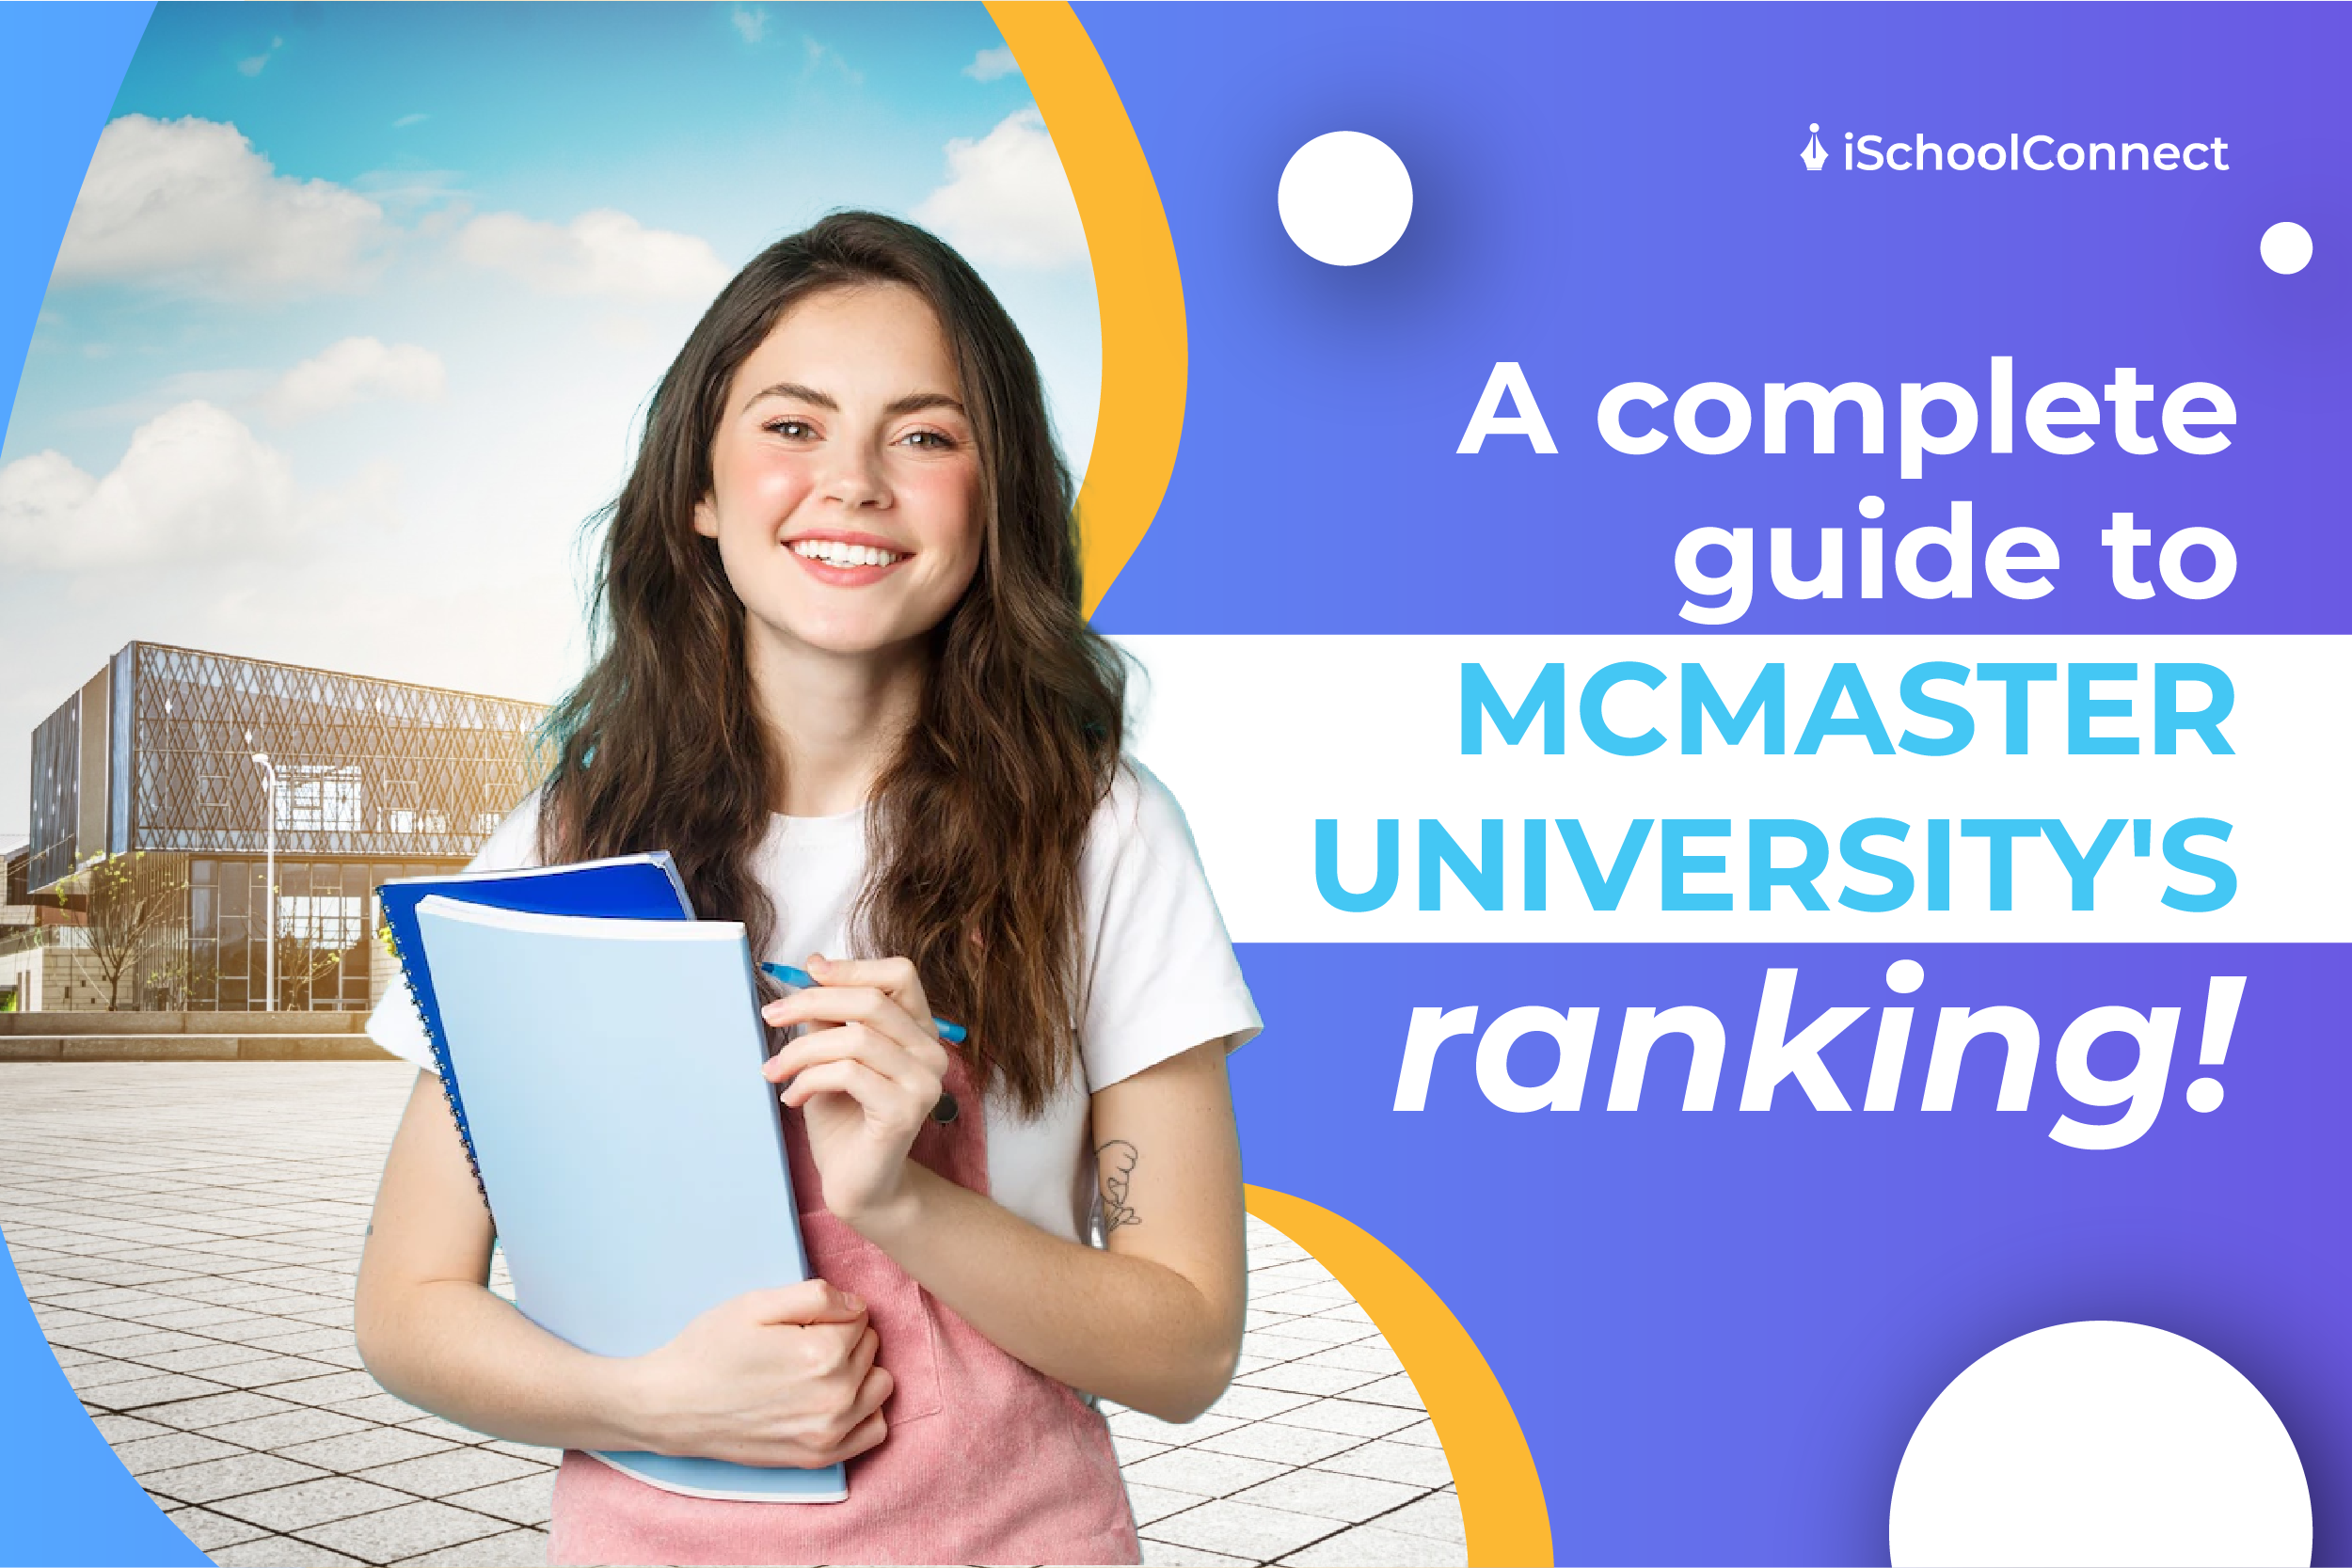 McMaster University rankings and more